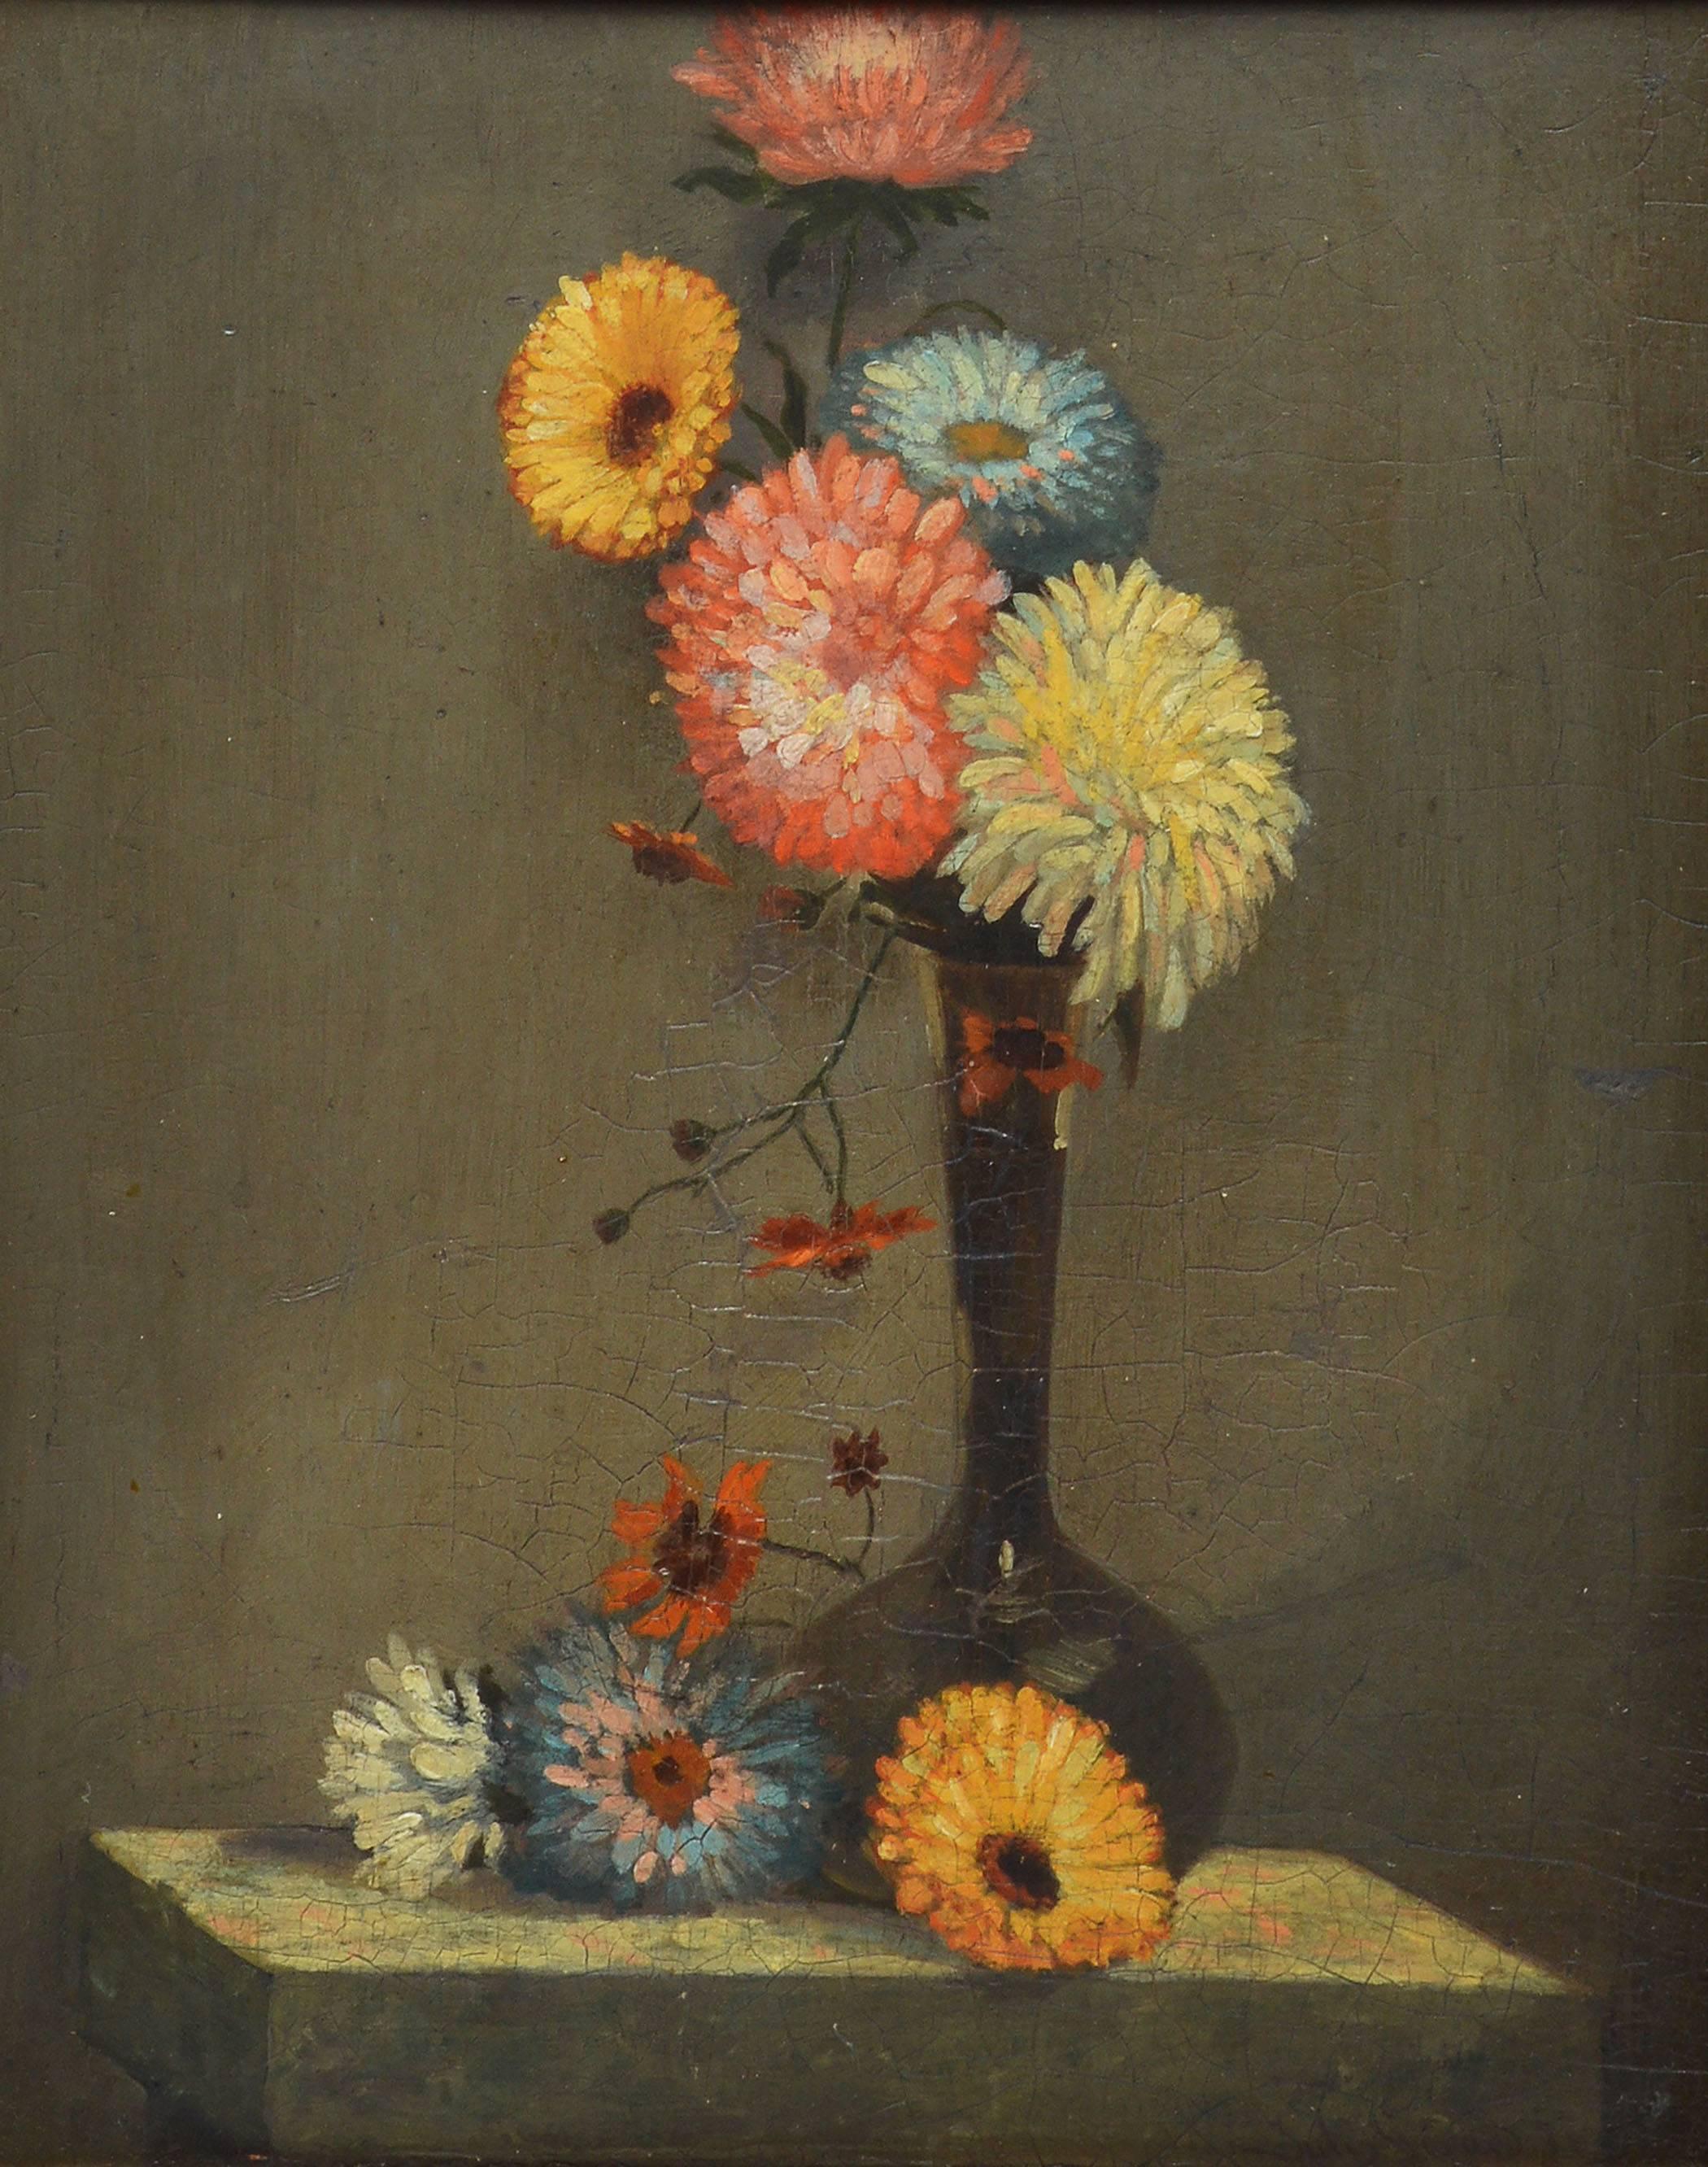 Classical Flower Still Life - Realist Painting by Unknown